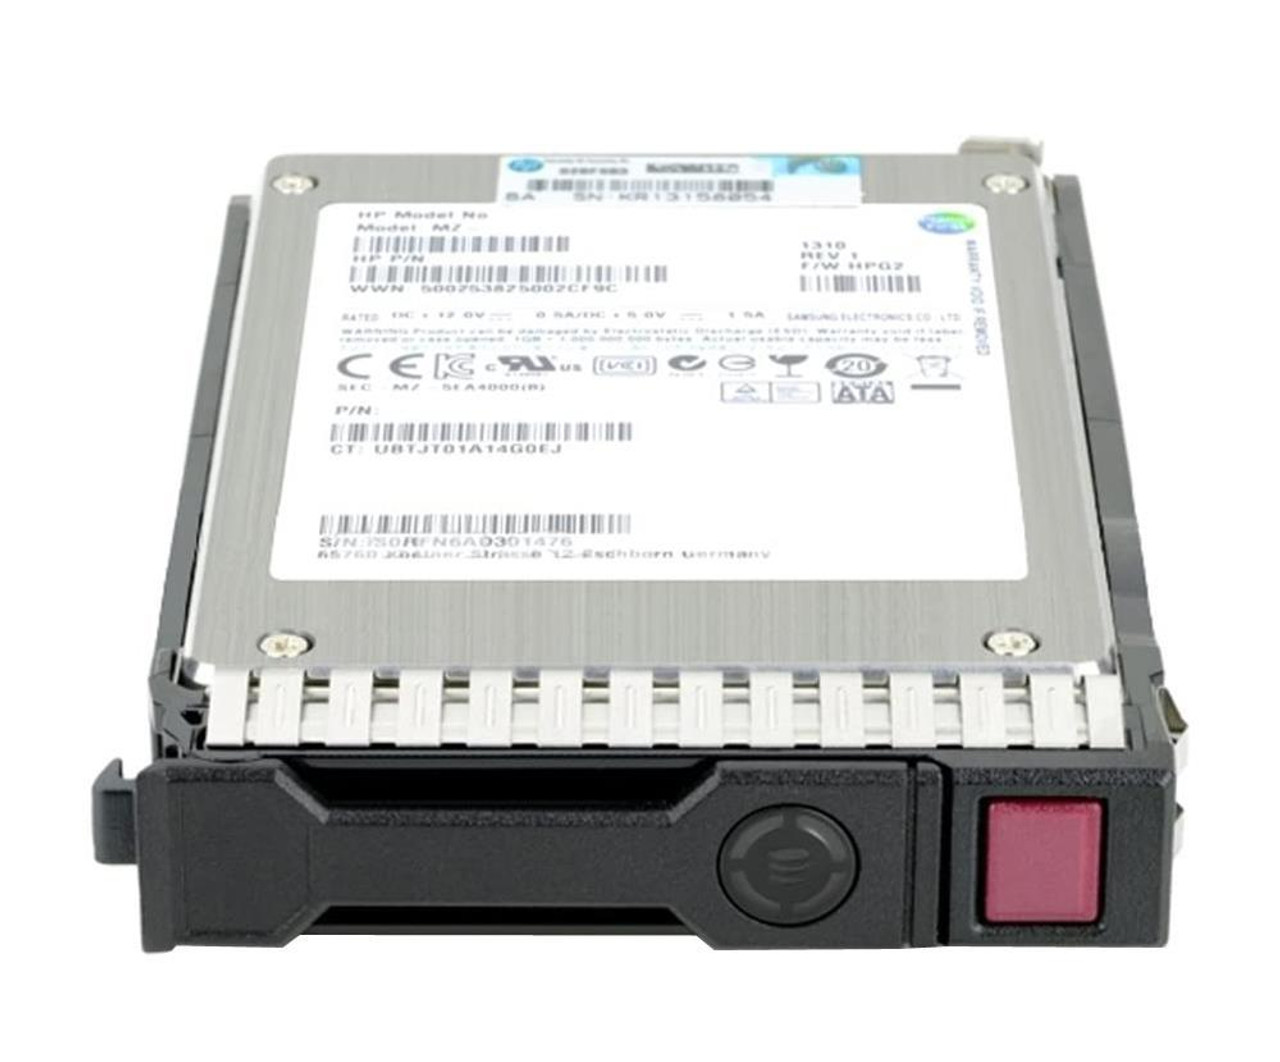 P04541-H21#0D1 HPE 400GB SAS 12Gbps 2.5-inch Internal Solid State Drive (SSD) with Smart Carrier